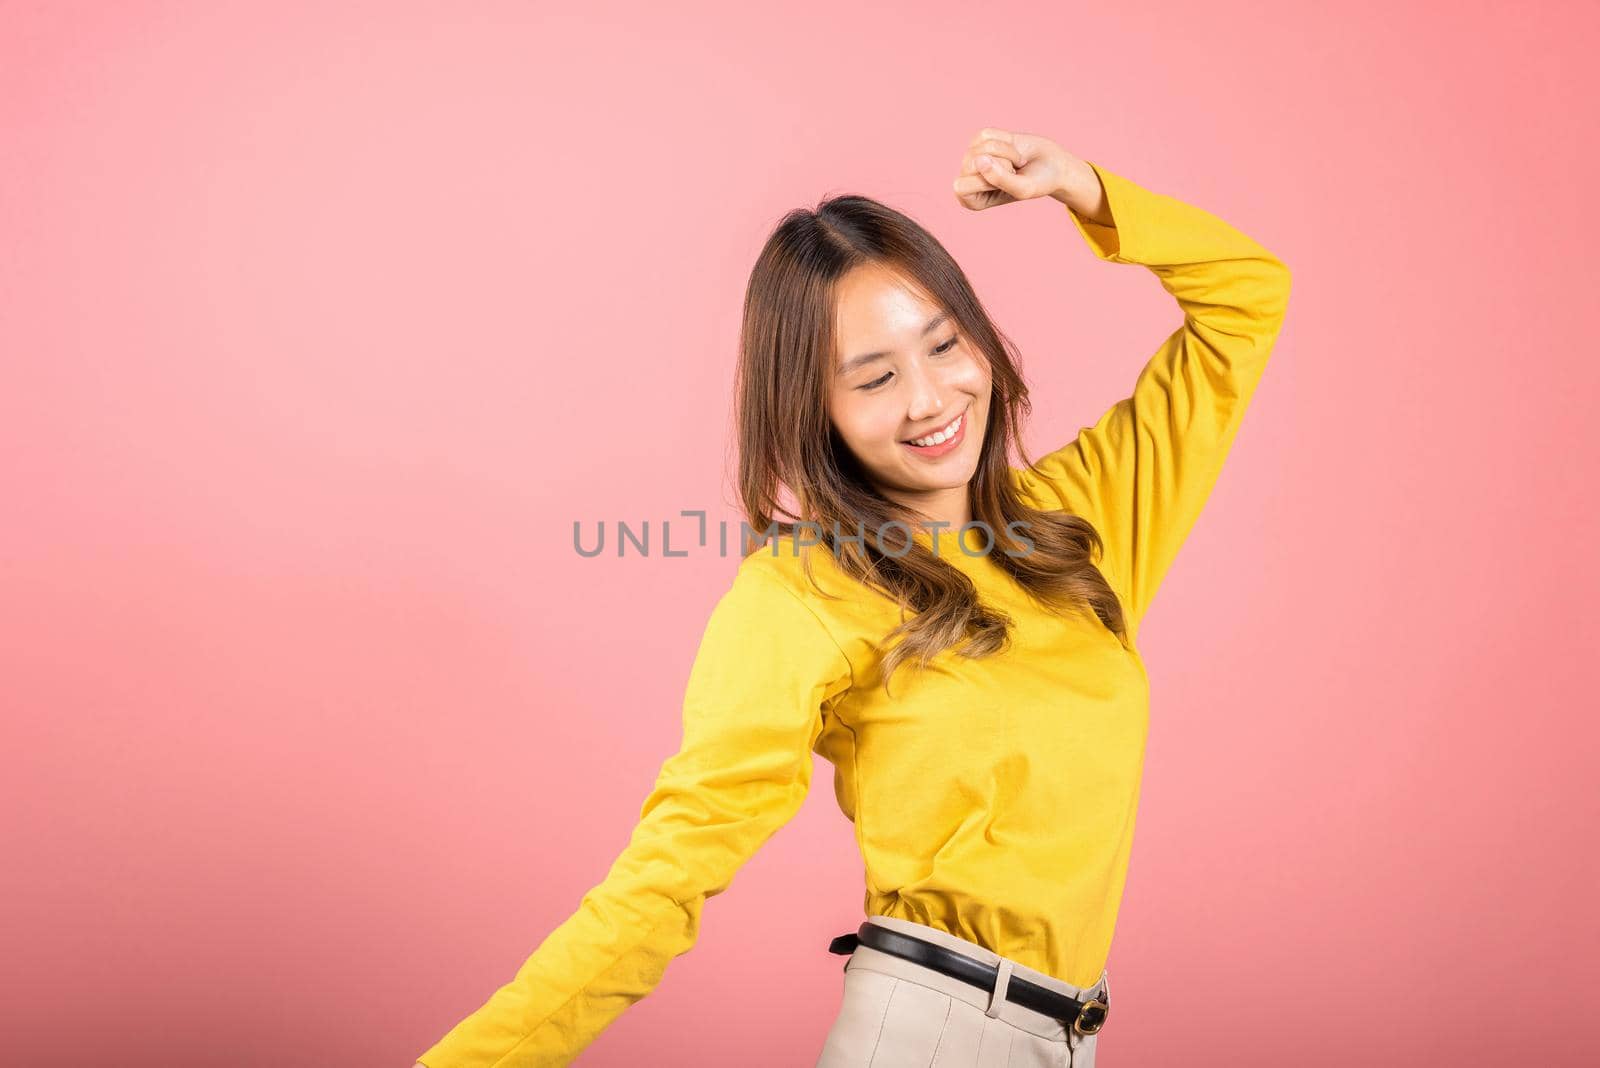 Asian young woman dancing with inspired face expression and raising hands up by Sorapop